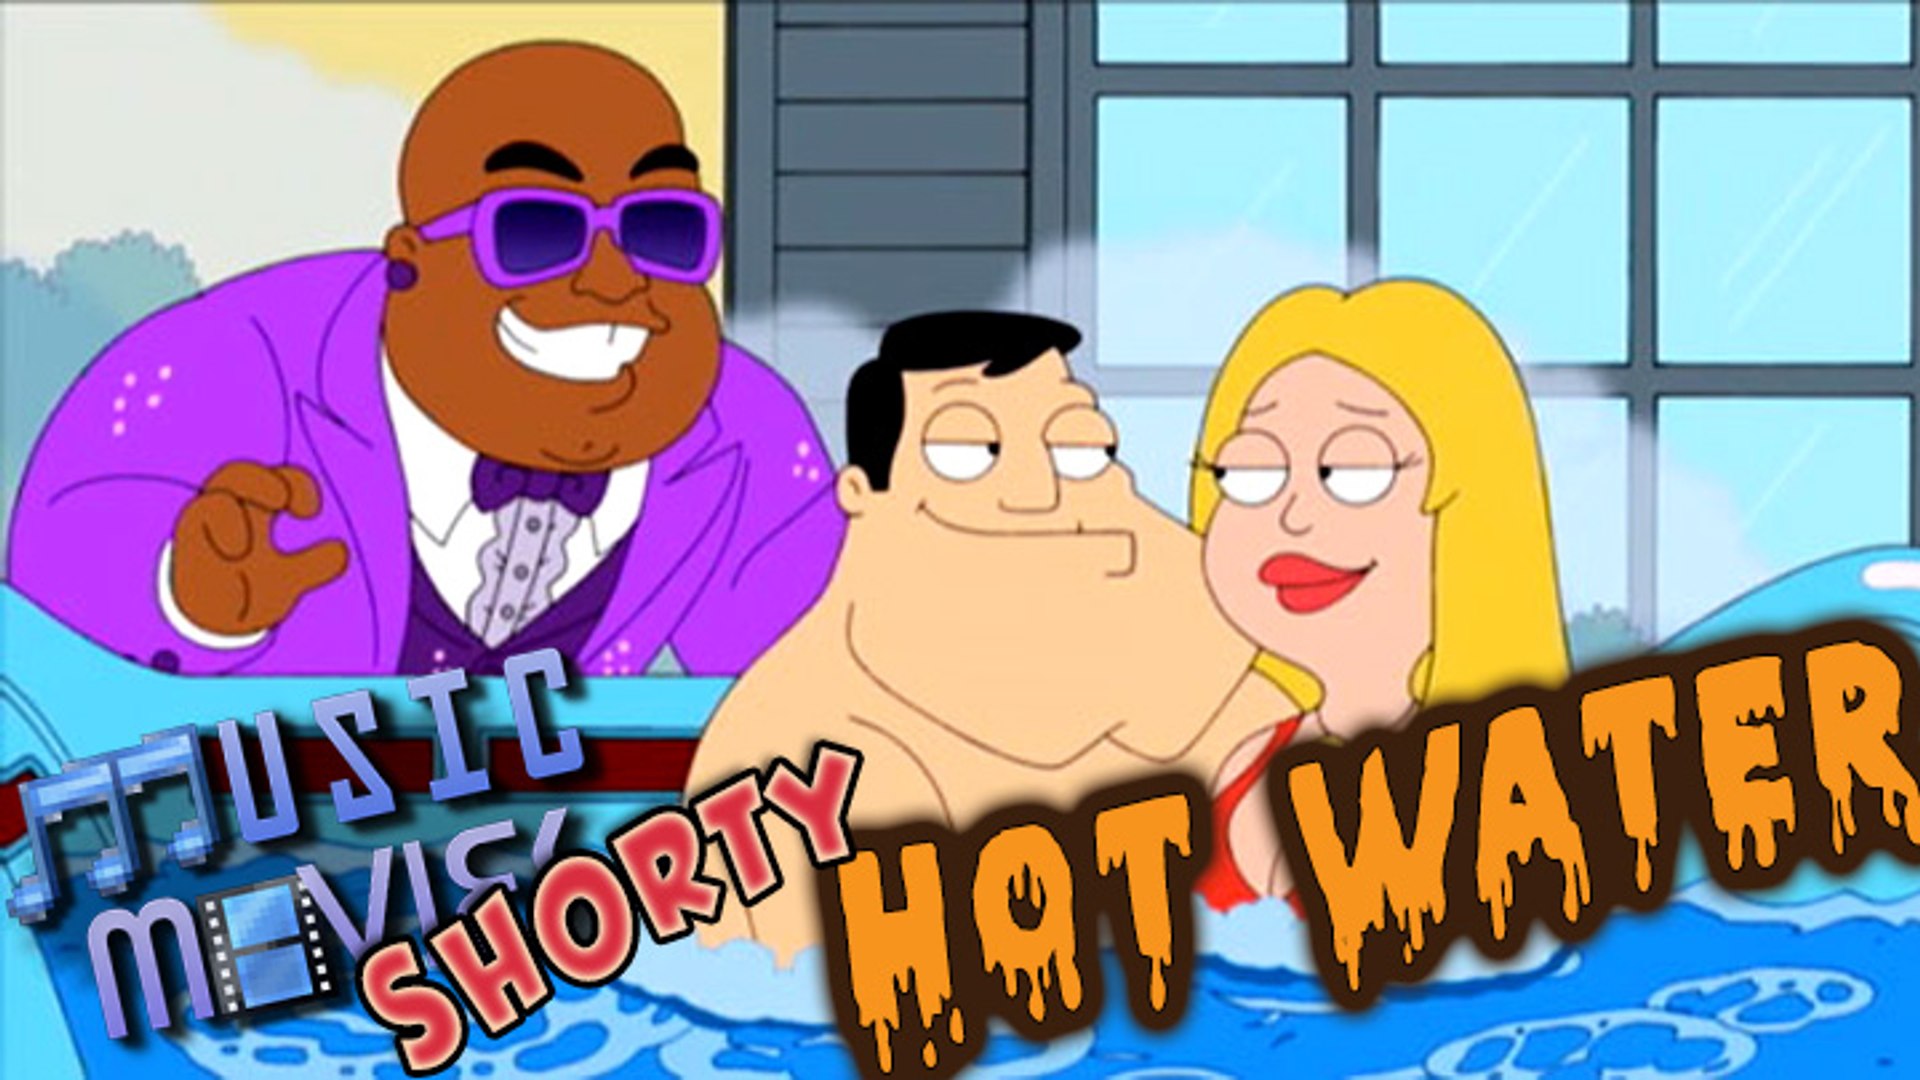 Music Movies Shorty- American Dad: Hot Water - video Dailymotion